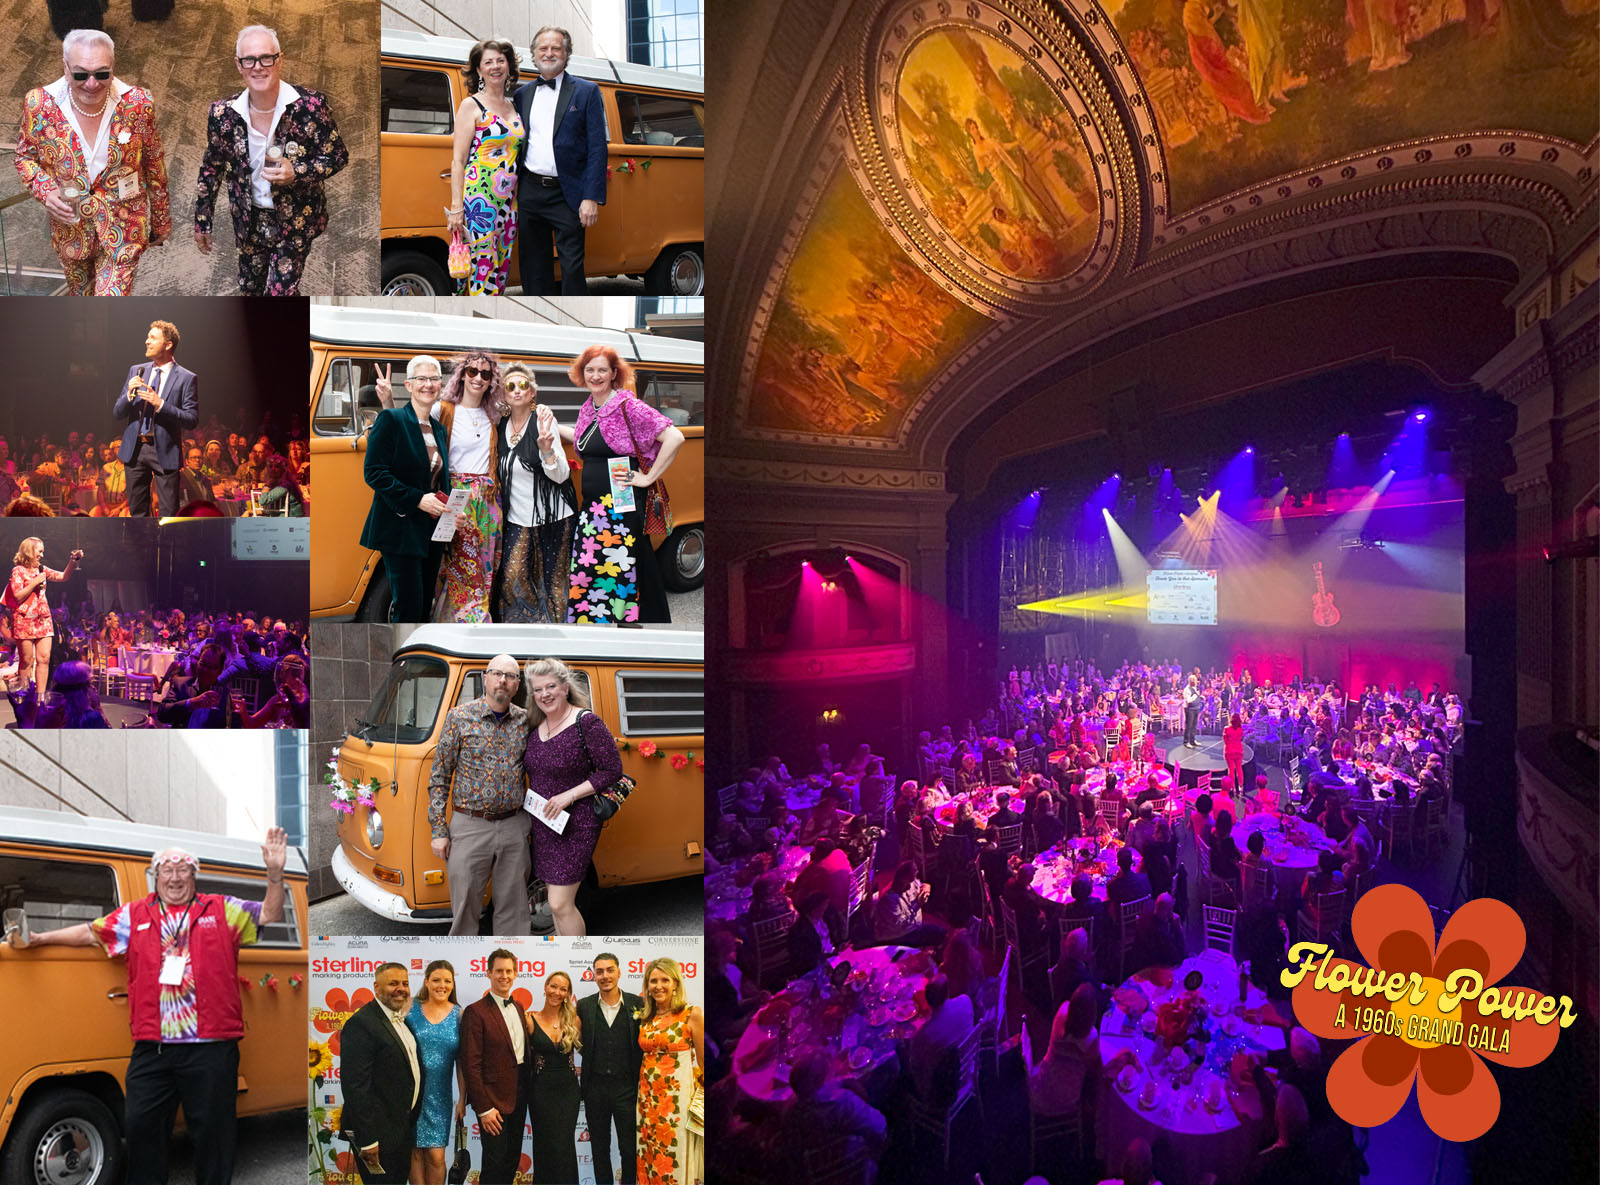 A montage of guests at the 2024 Grand Gala, picturing smiling people posing in front of an orange VW bus and a photo wall featuring sponsor logos. On the right side is a large image of the Spriet Stage at the Grand Theatre with tables for the Gala set up on the dramatically-lit stage. In the centre of the stage is a large illuminated neon-sign shaped like a guitar, framed by two large projection screens